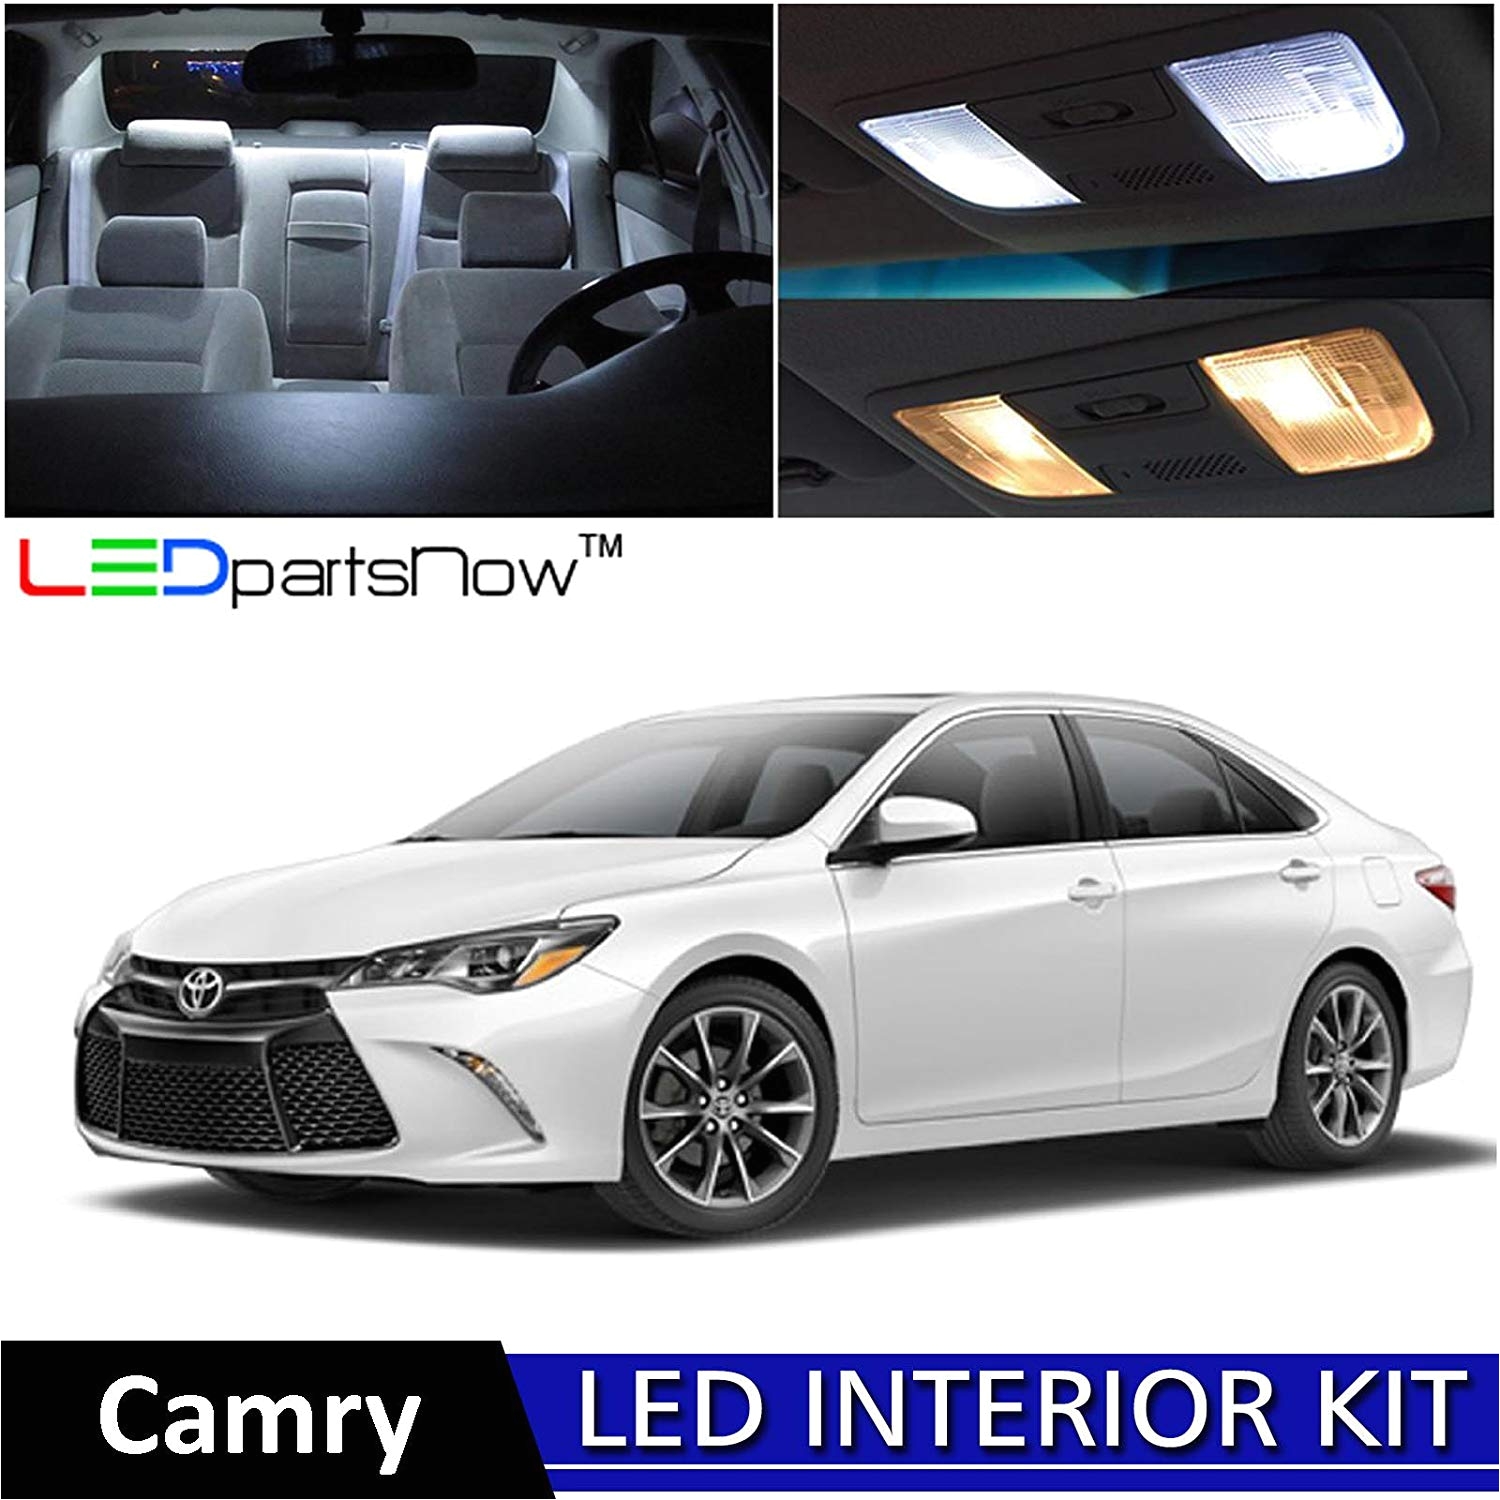 amazon com ledpartsnow 2015 2018 toyota camry led interior lights accessories replacement package kit 12 pieces white reverse lights automotive